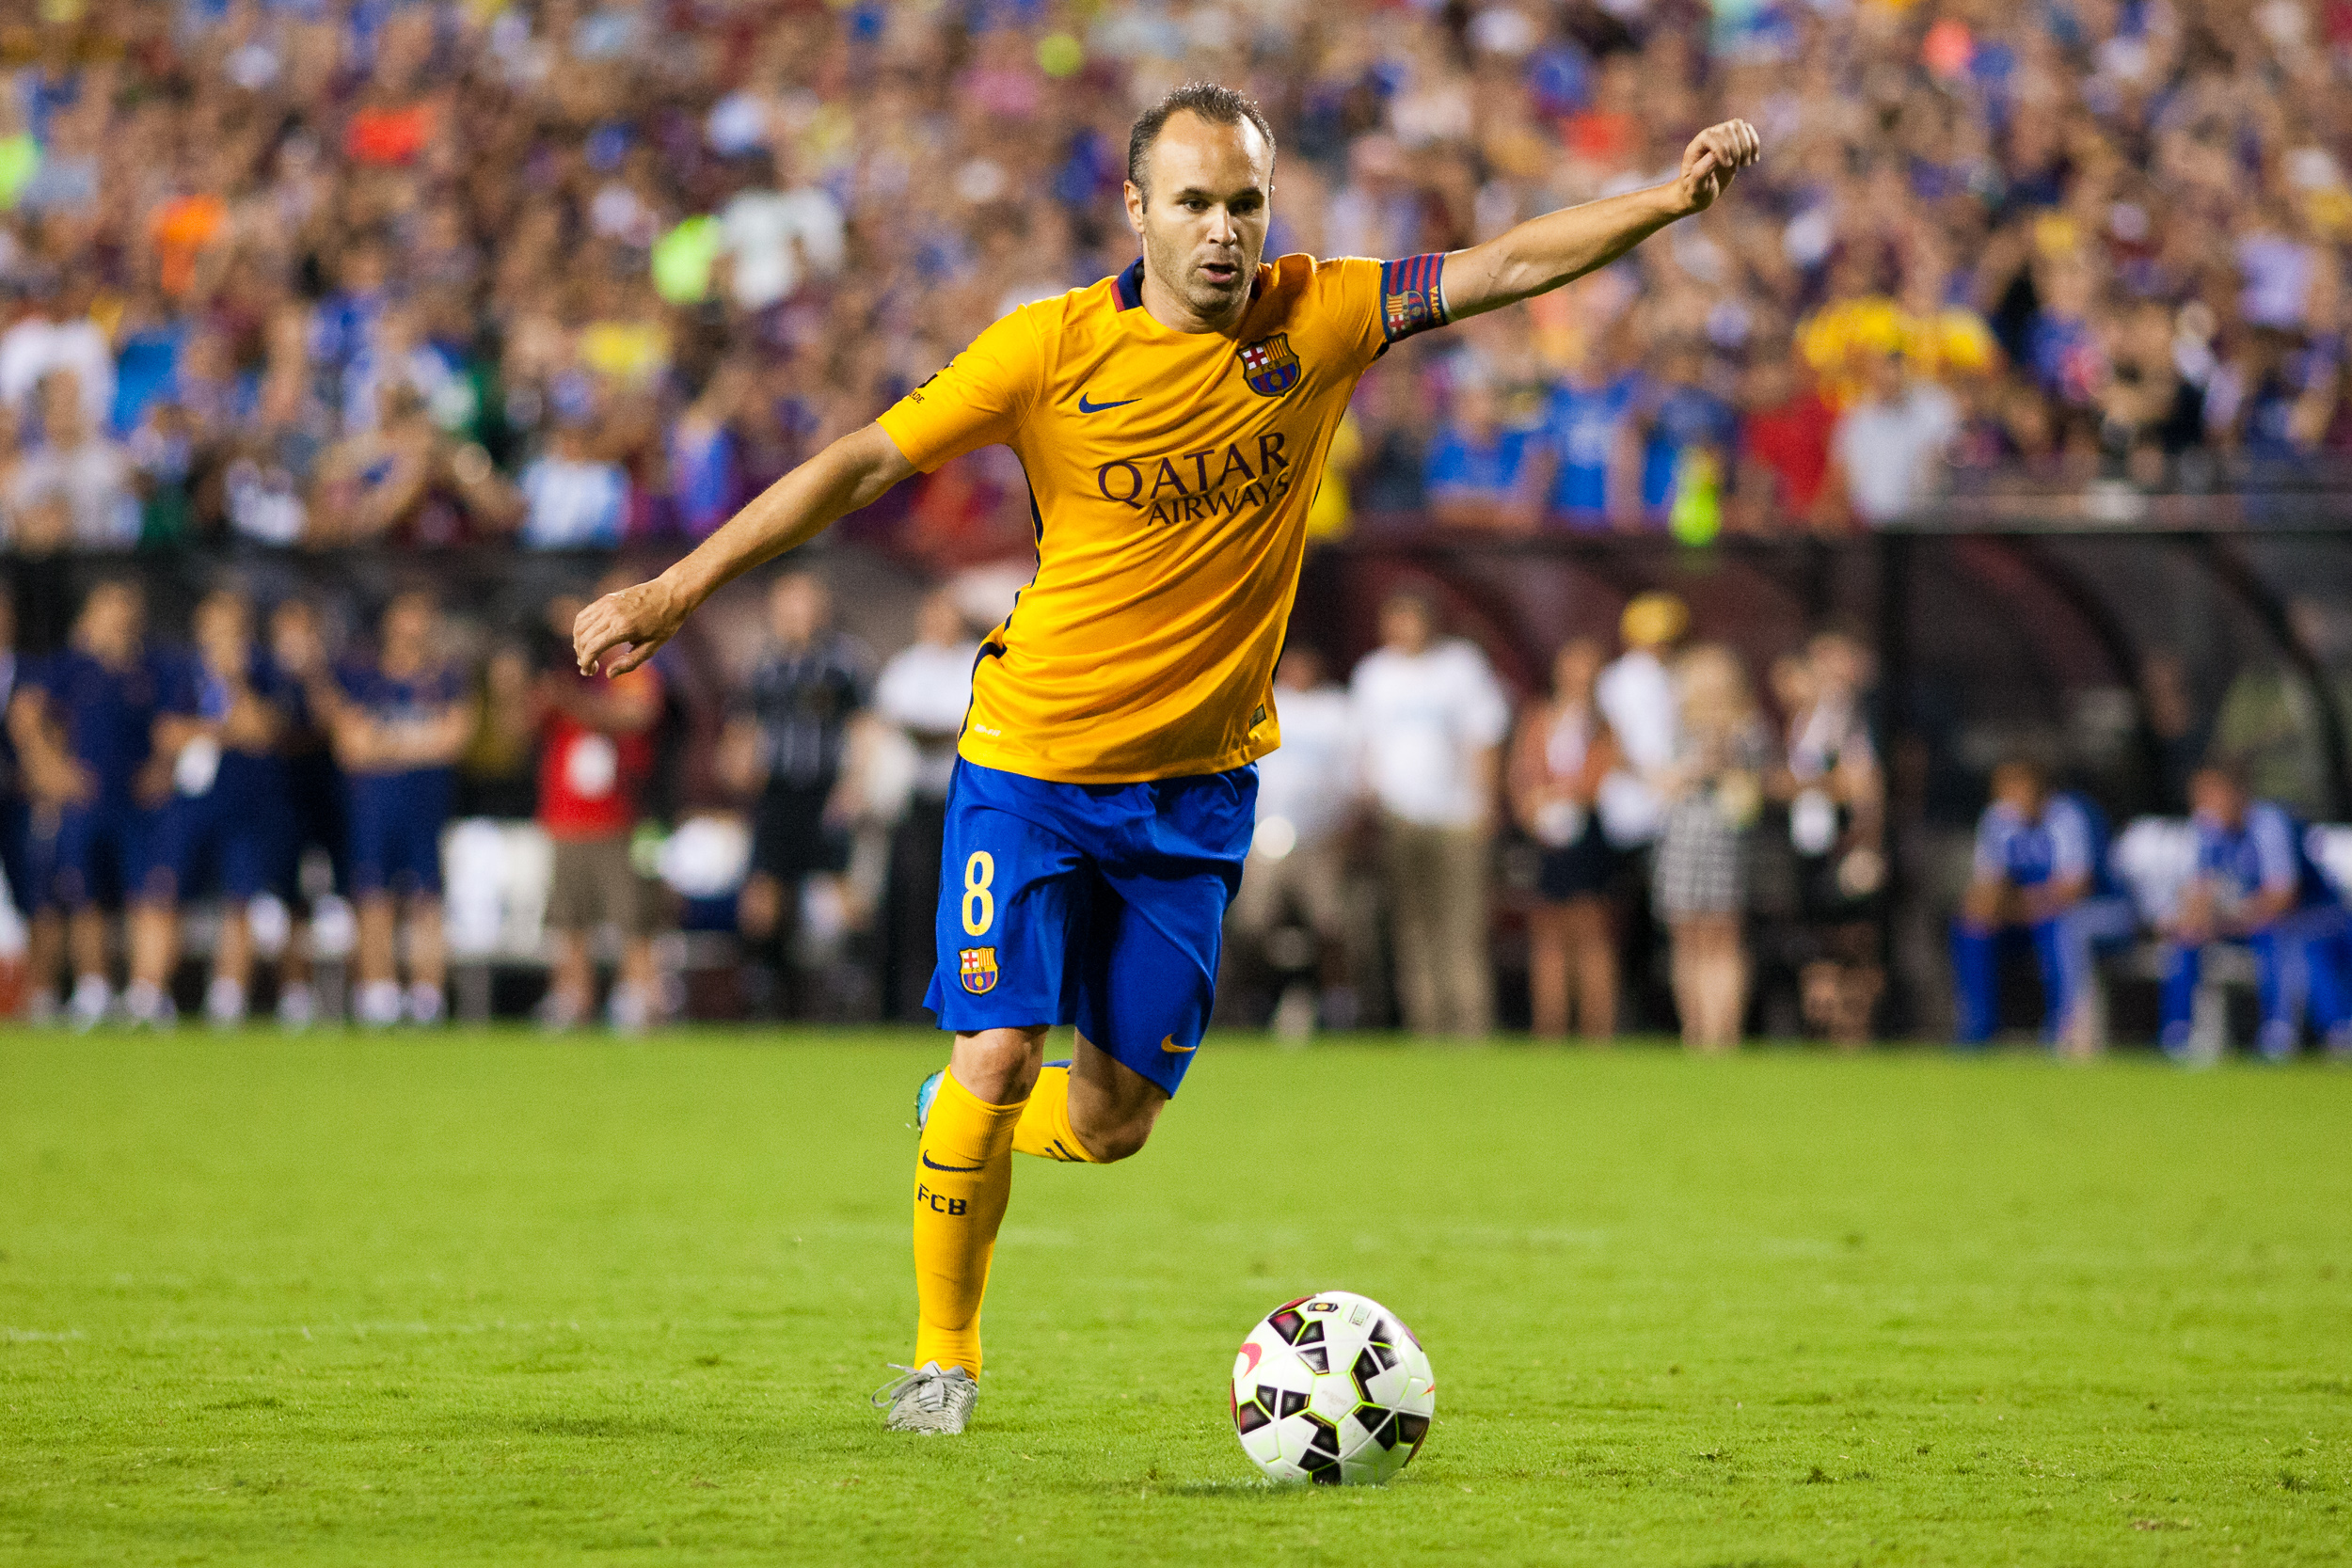  FC Barcelona’s Andres Iniesta takes a penalty kick vs. Chelsea FC at FedEx Field in Landover, MD, July 28, 2015. 